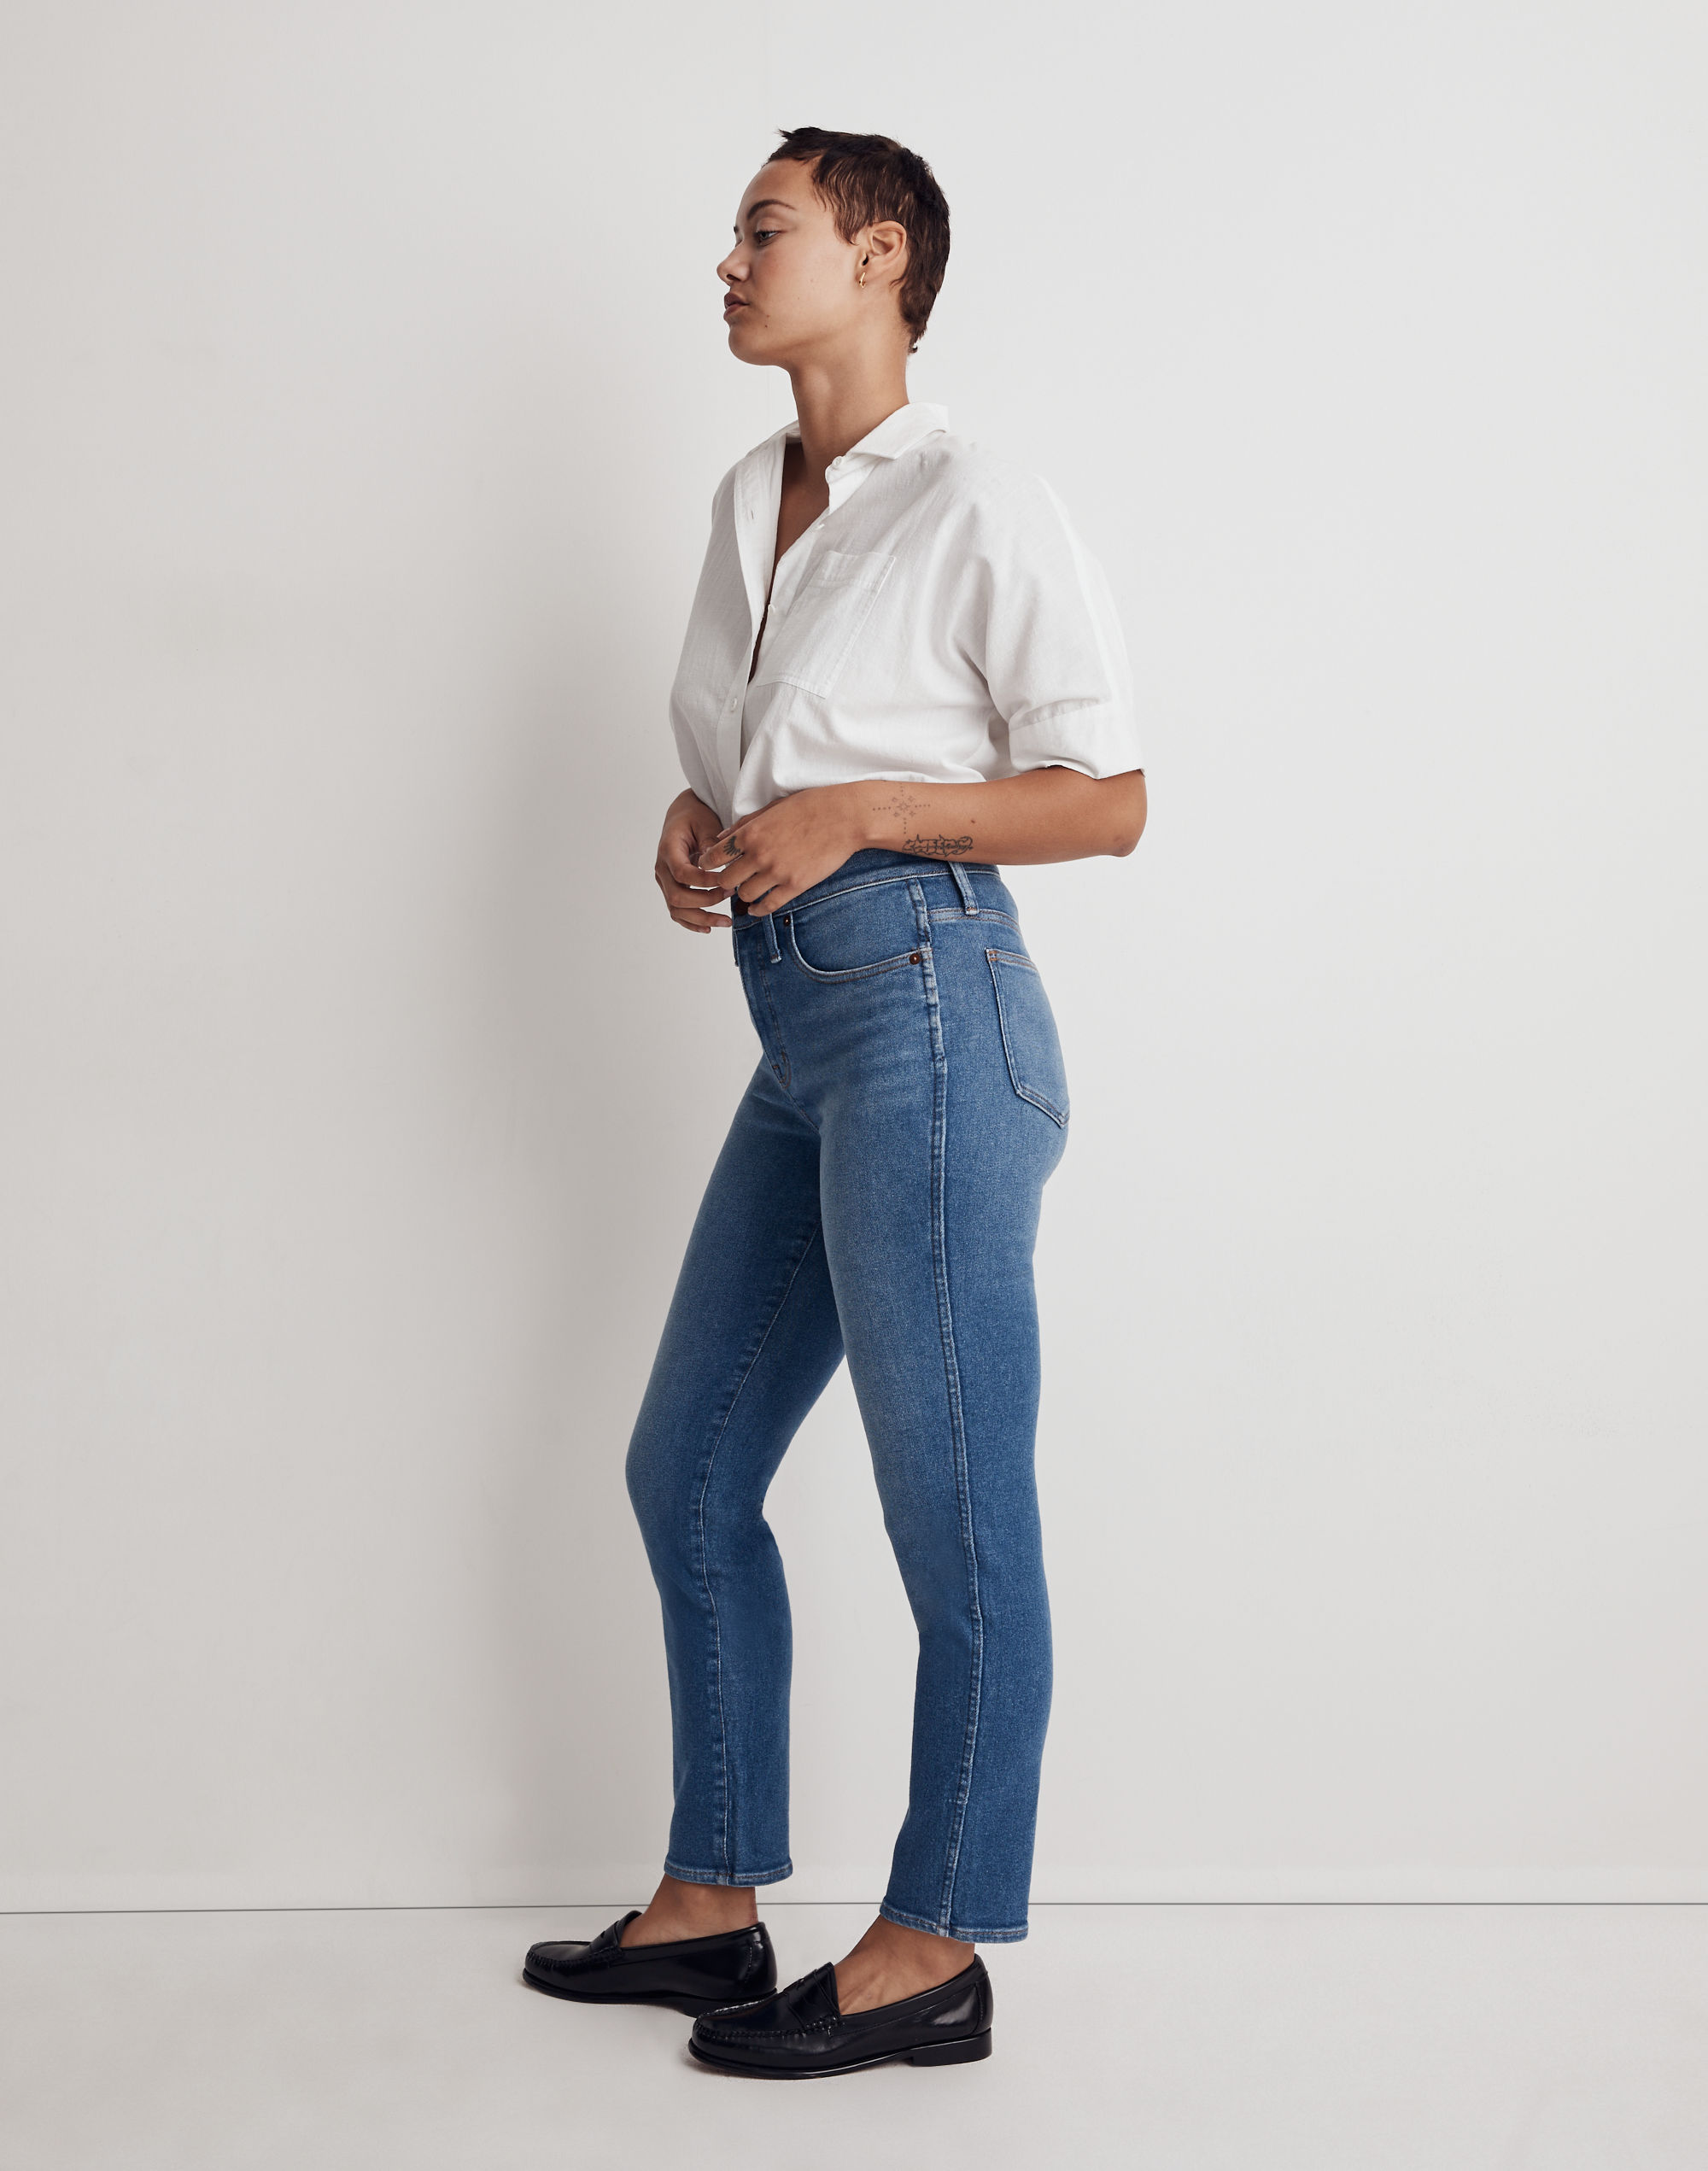 Curvy Stovepipe Jeans in Leaside Wash